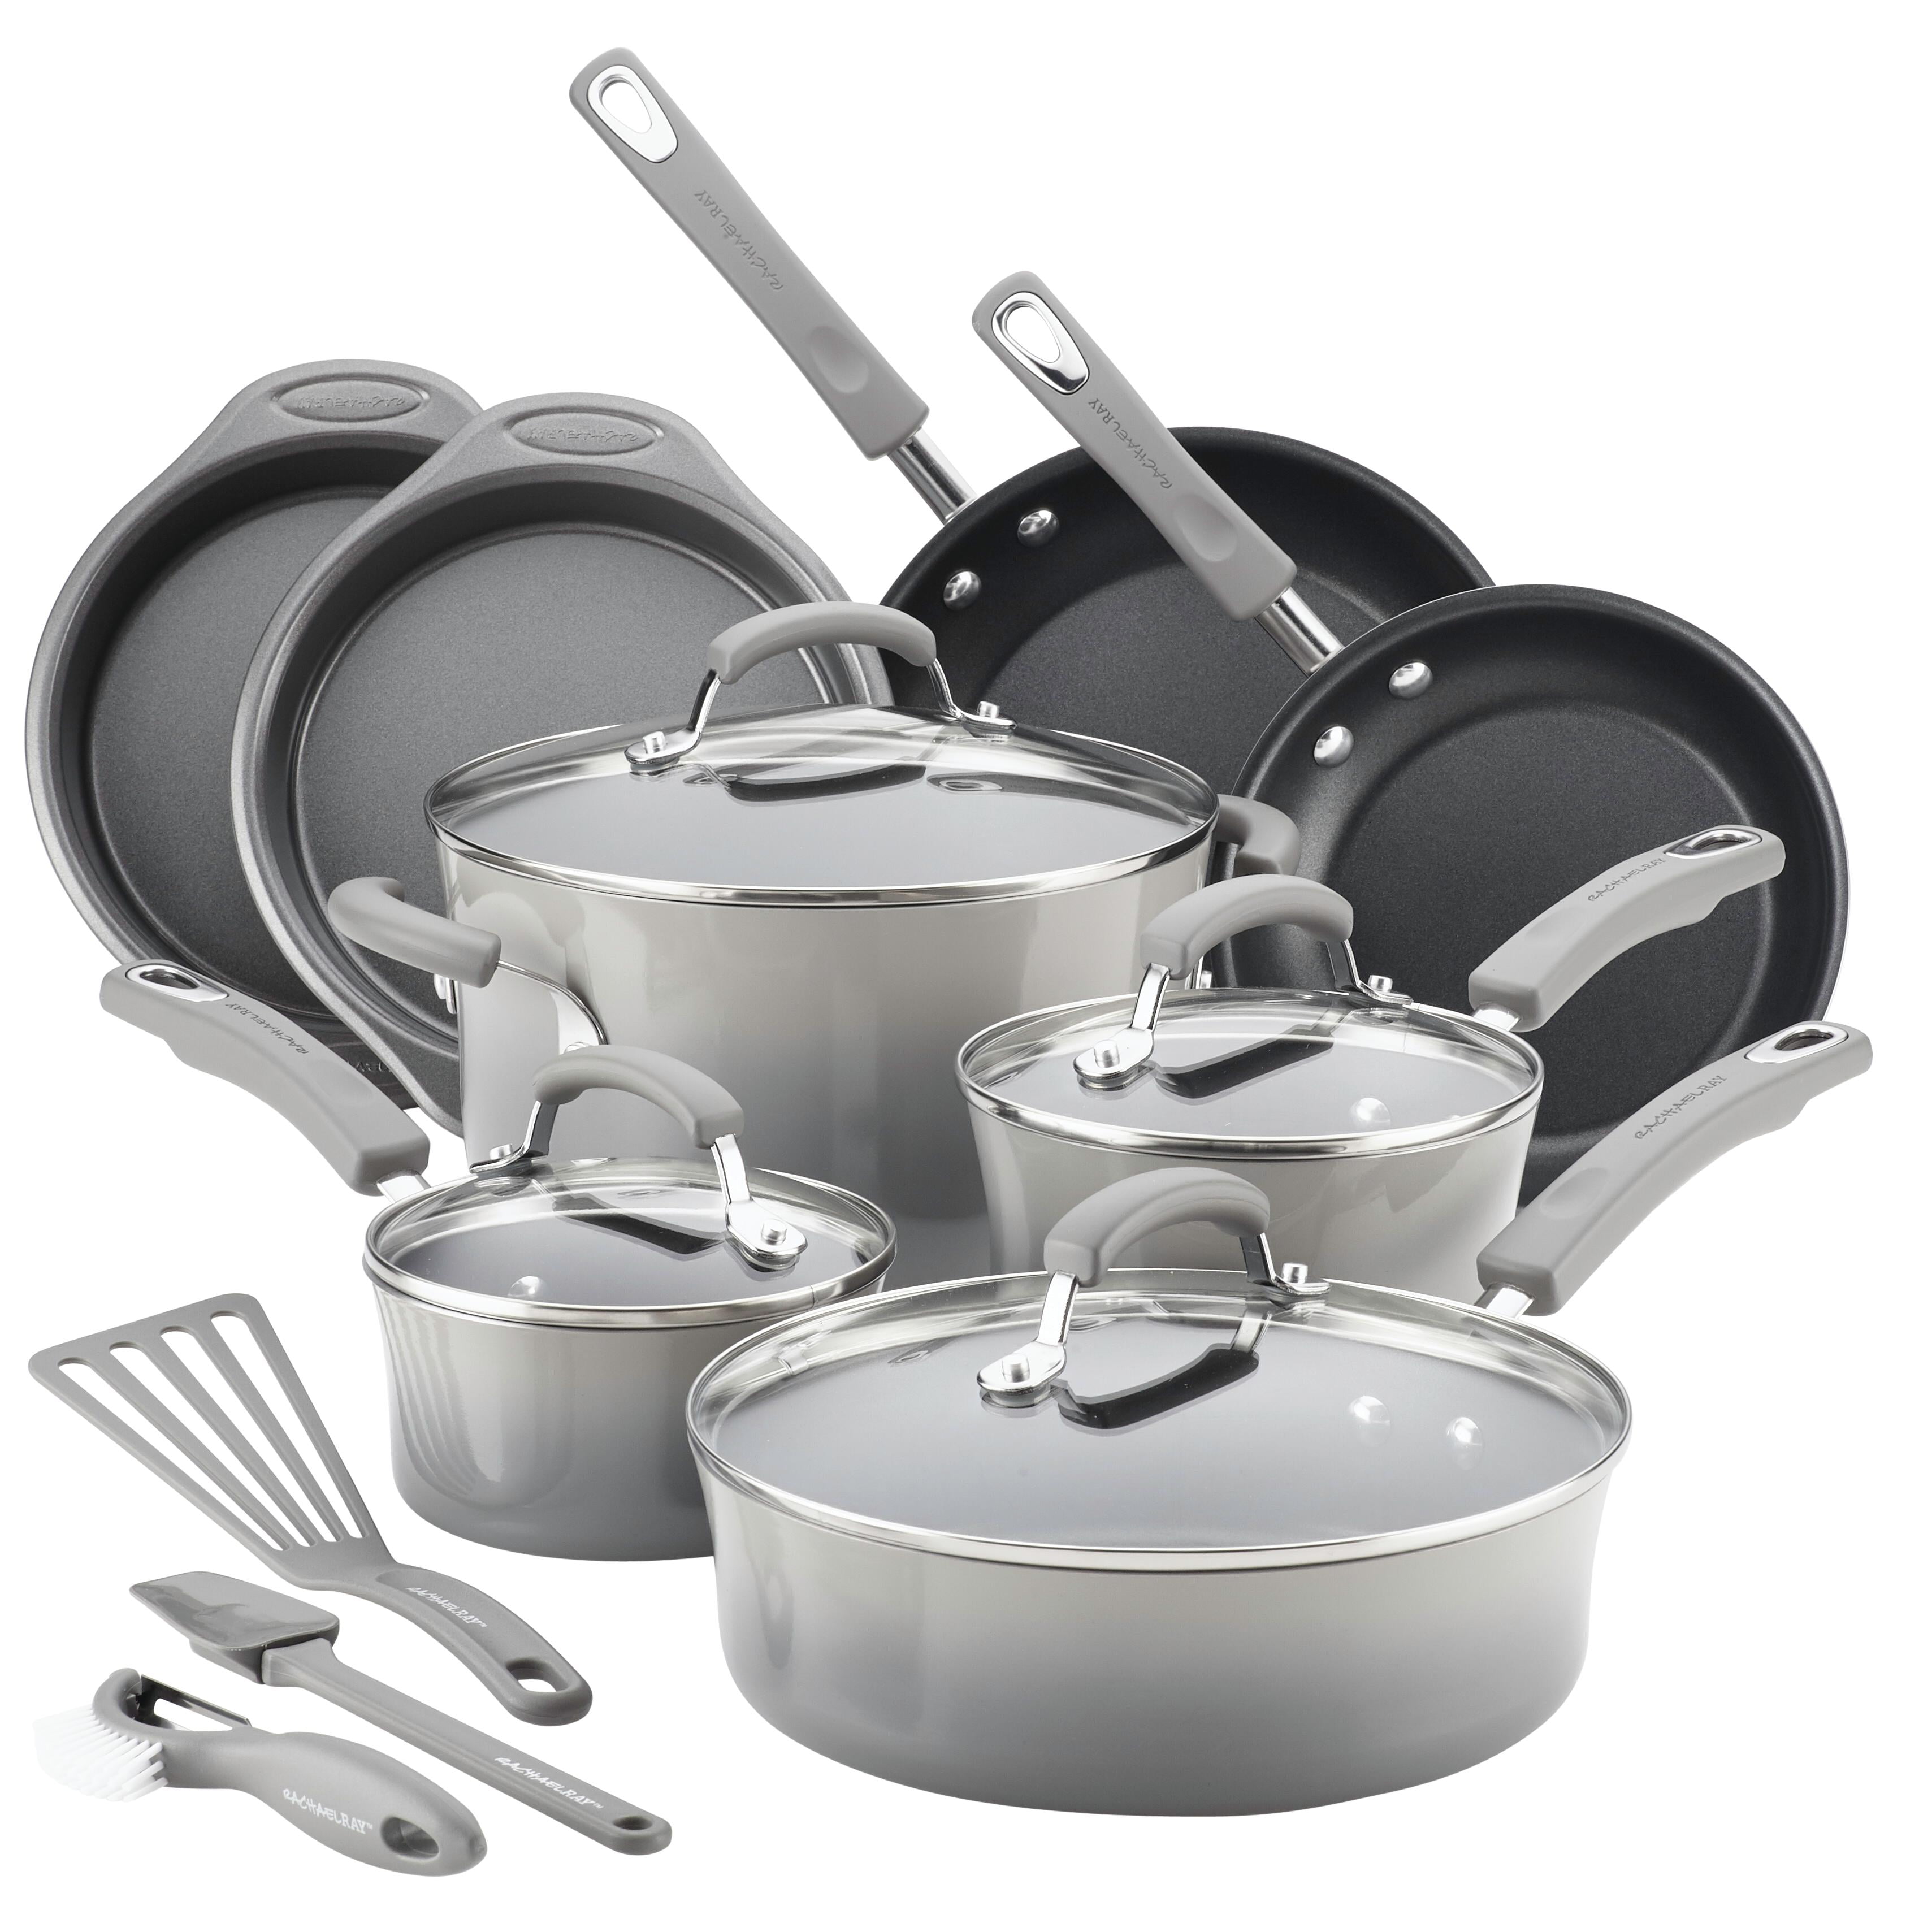 Rachael Ray's Pans Discount, 58% OFF | www.hcb.cat